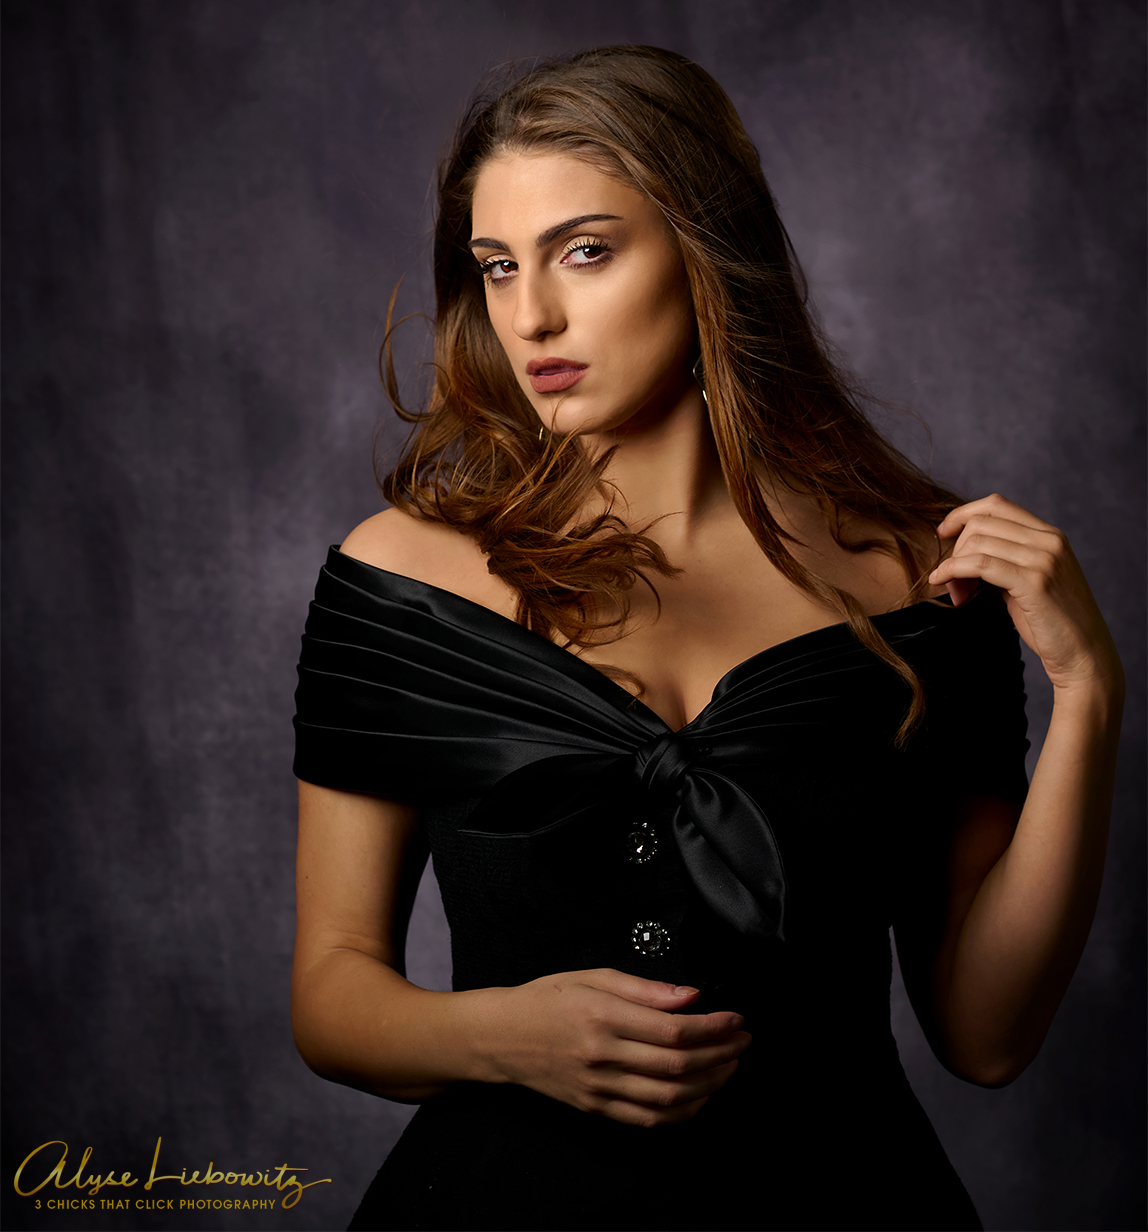 Model/actress Alexandria Pascucci, photographed by 3 Chicks That Click Photography, in Somerset, NJ